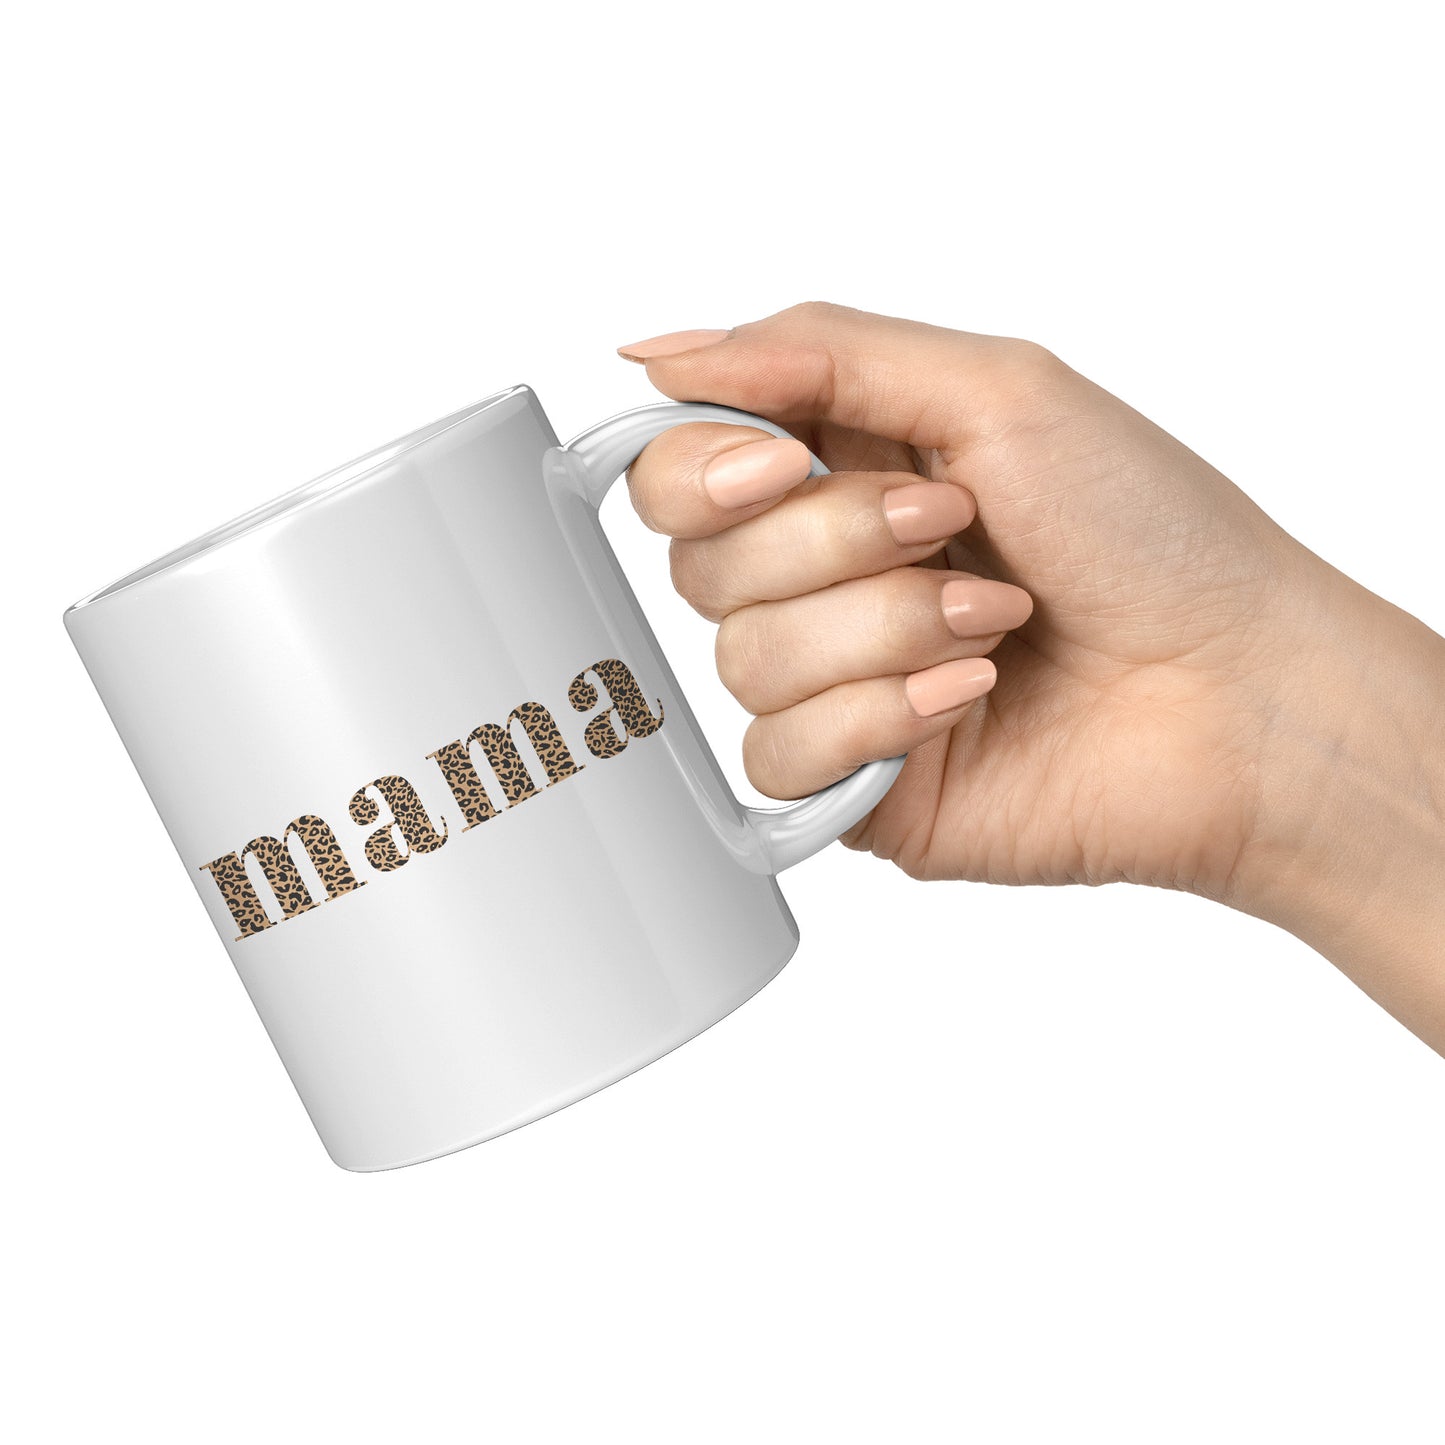 Leopard Mamas This Mug is for You!